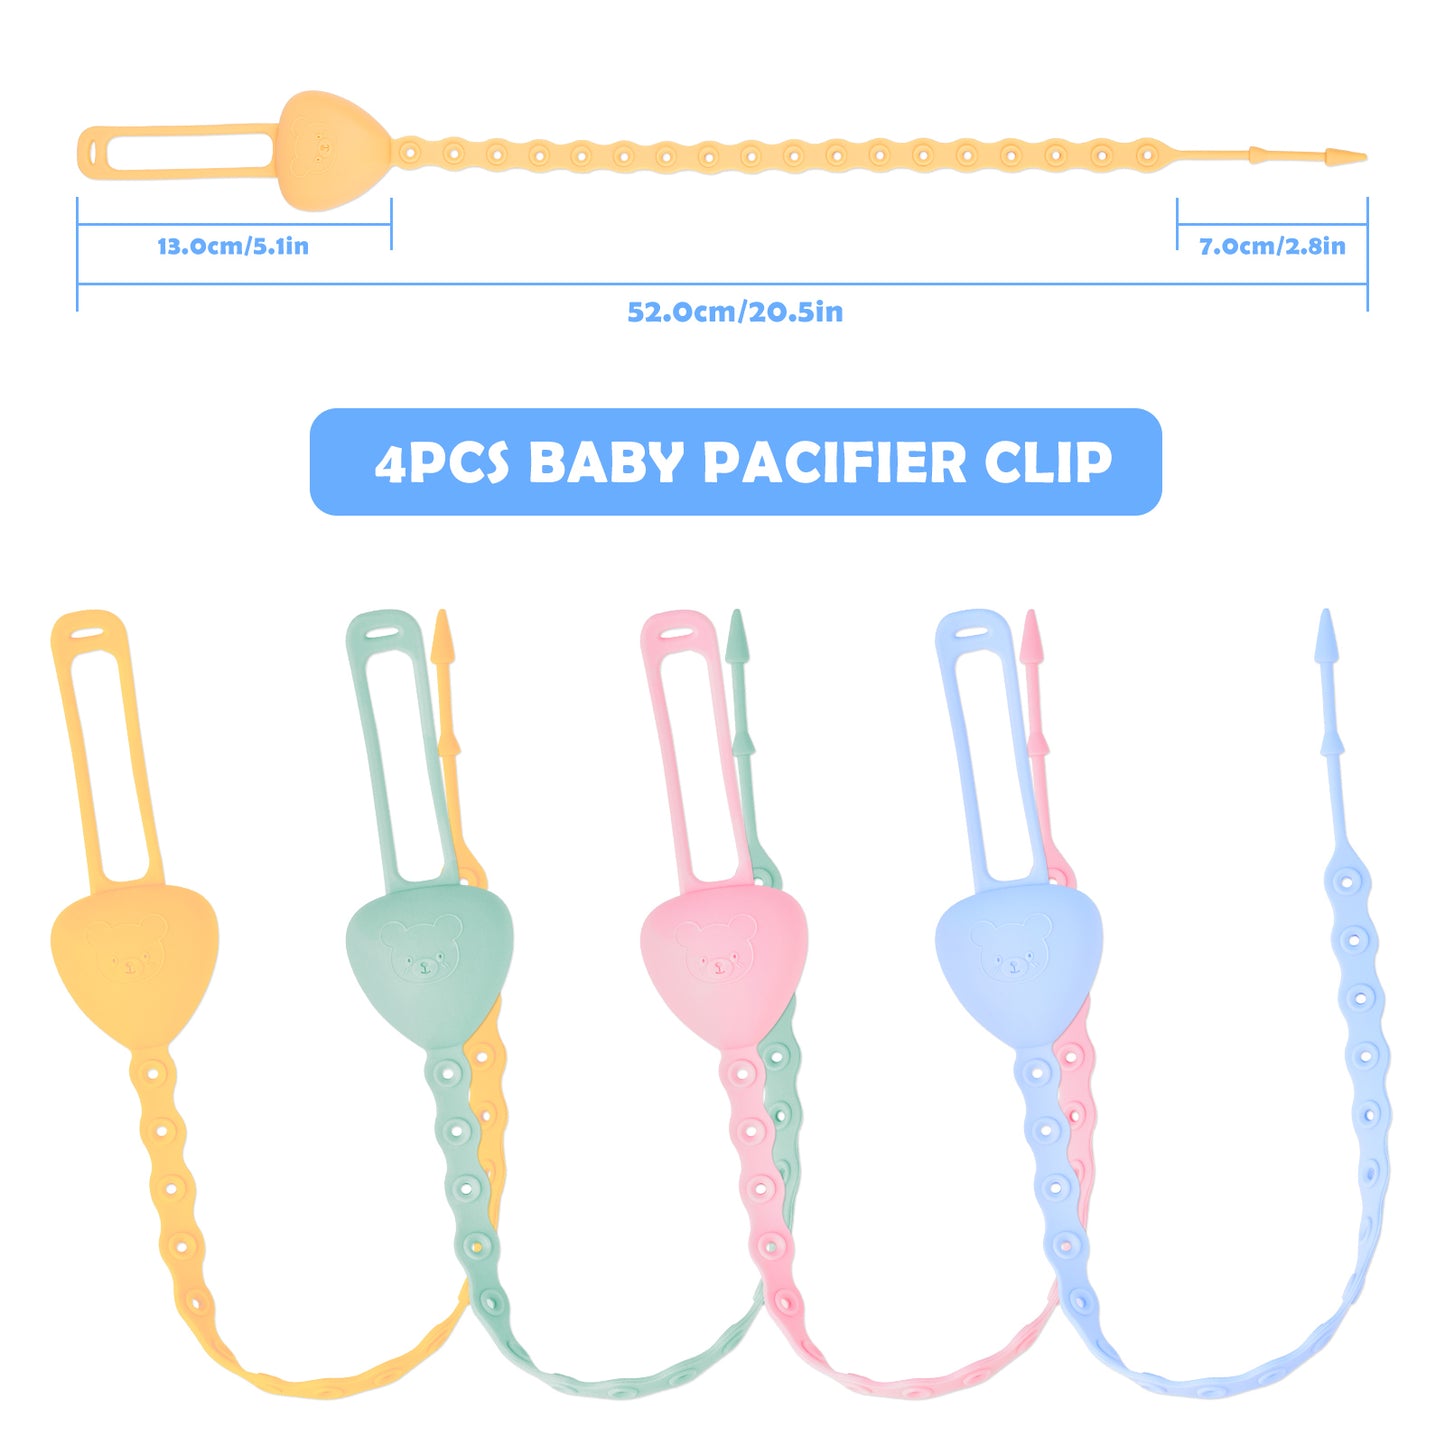 4-Pack Silicone Baby Pacifier Clip Holder Stretchable Toy Safety Straps, Unive